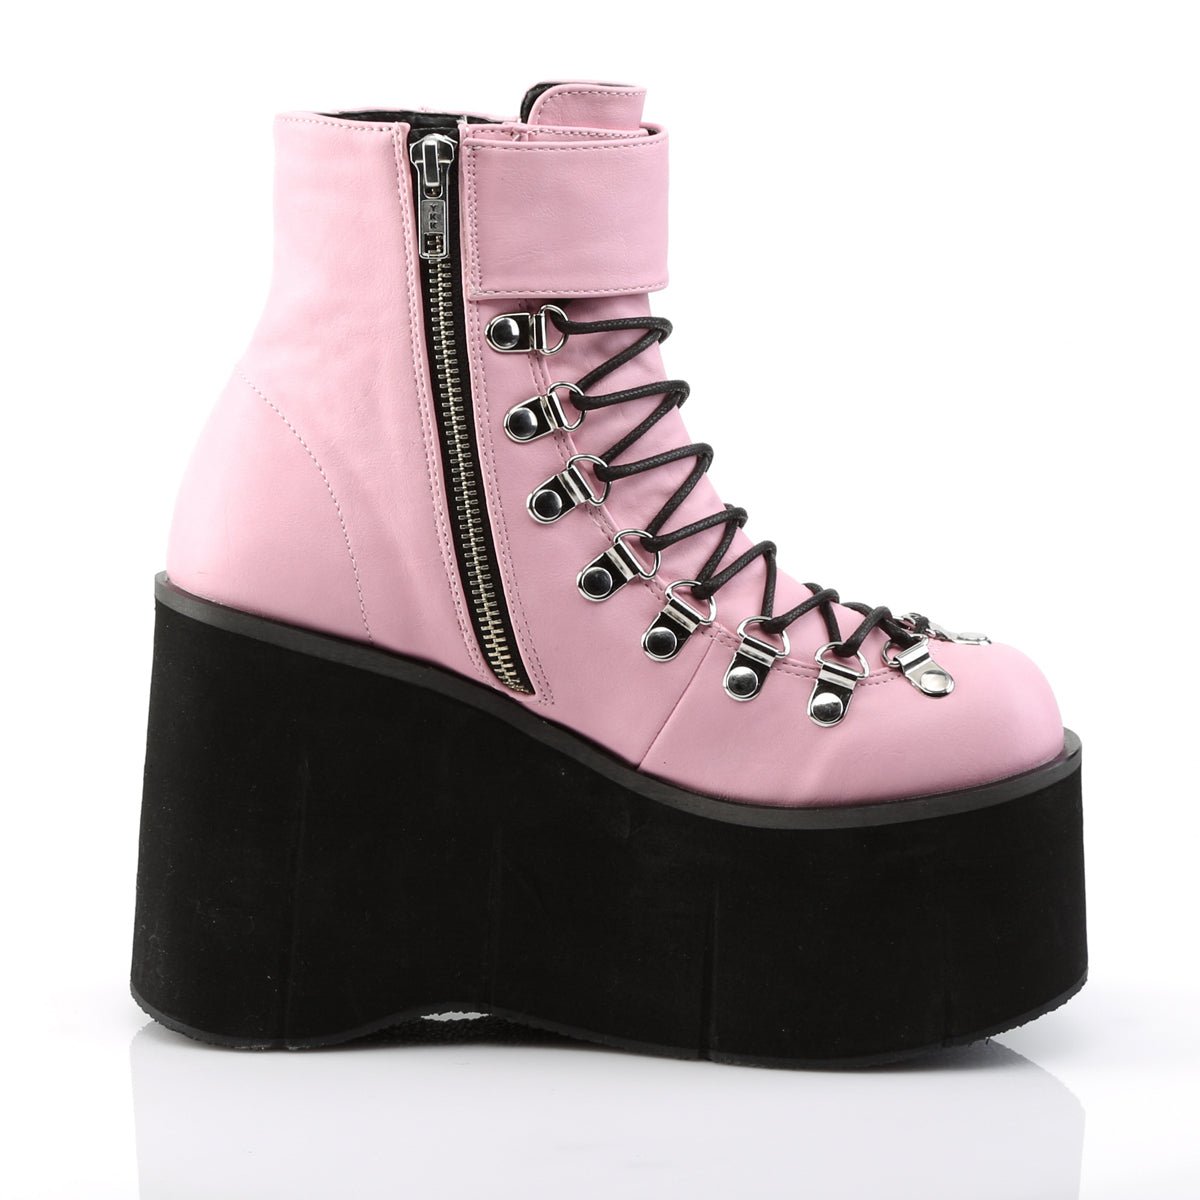 Too Fast | Demonia Kera 21 | Baby Pink Vegan Leather Women's Ankle Boots